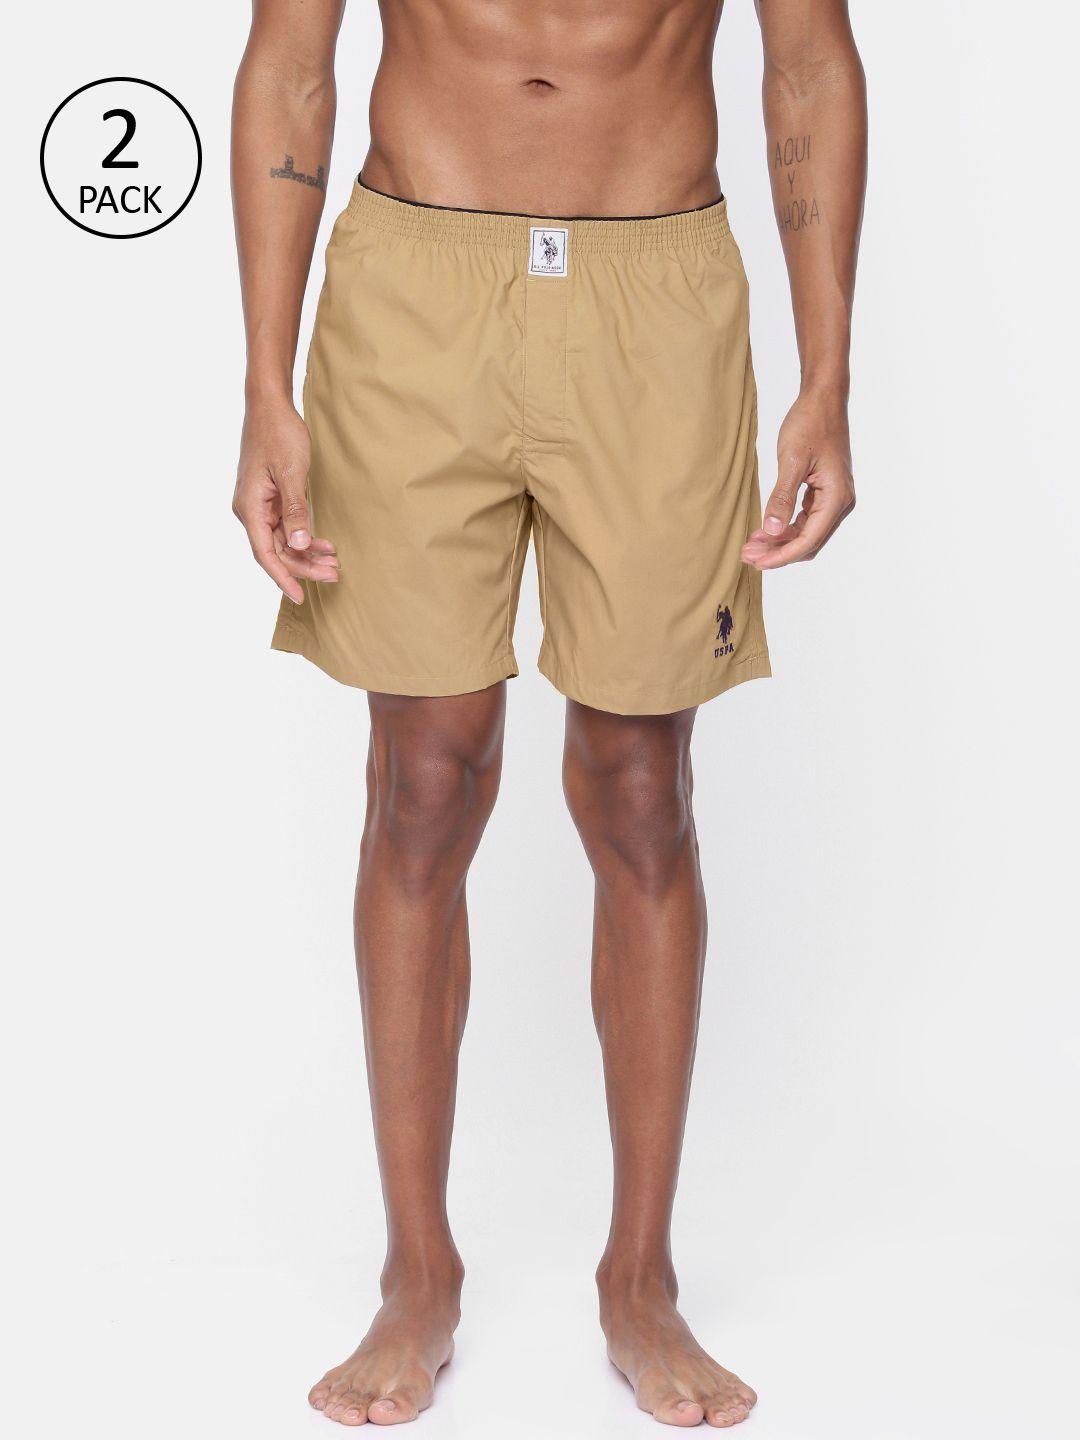 u.s. polo assn. men pack of 2 khaki solid boxers